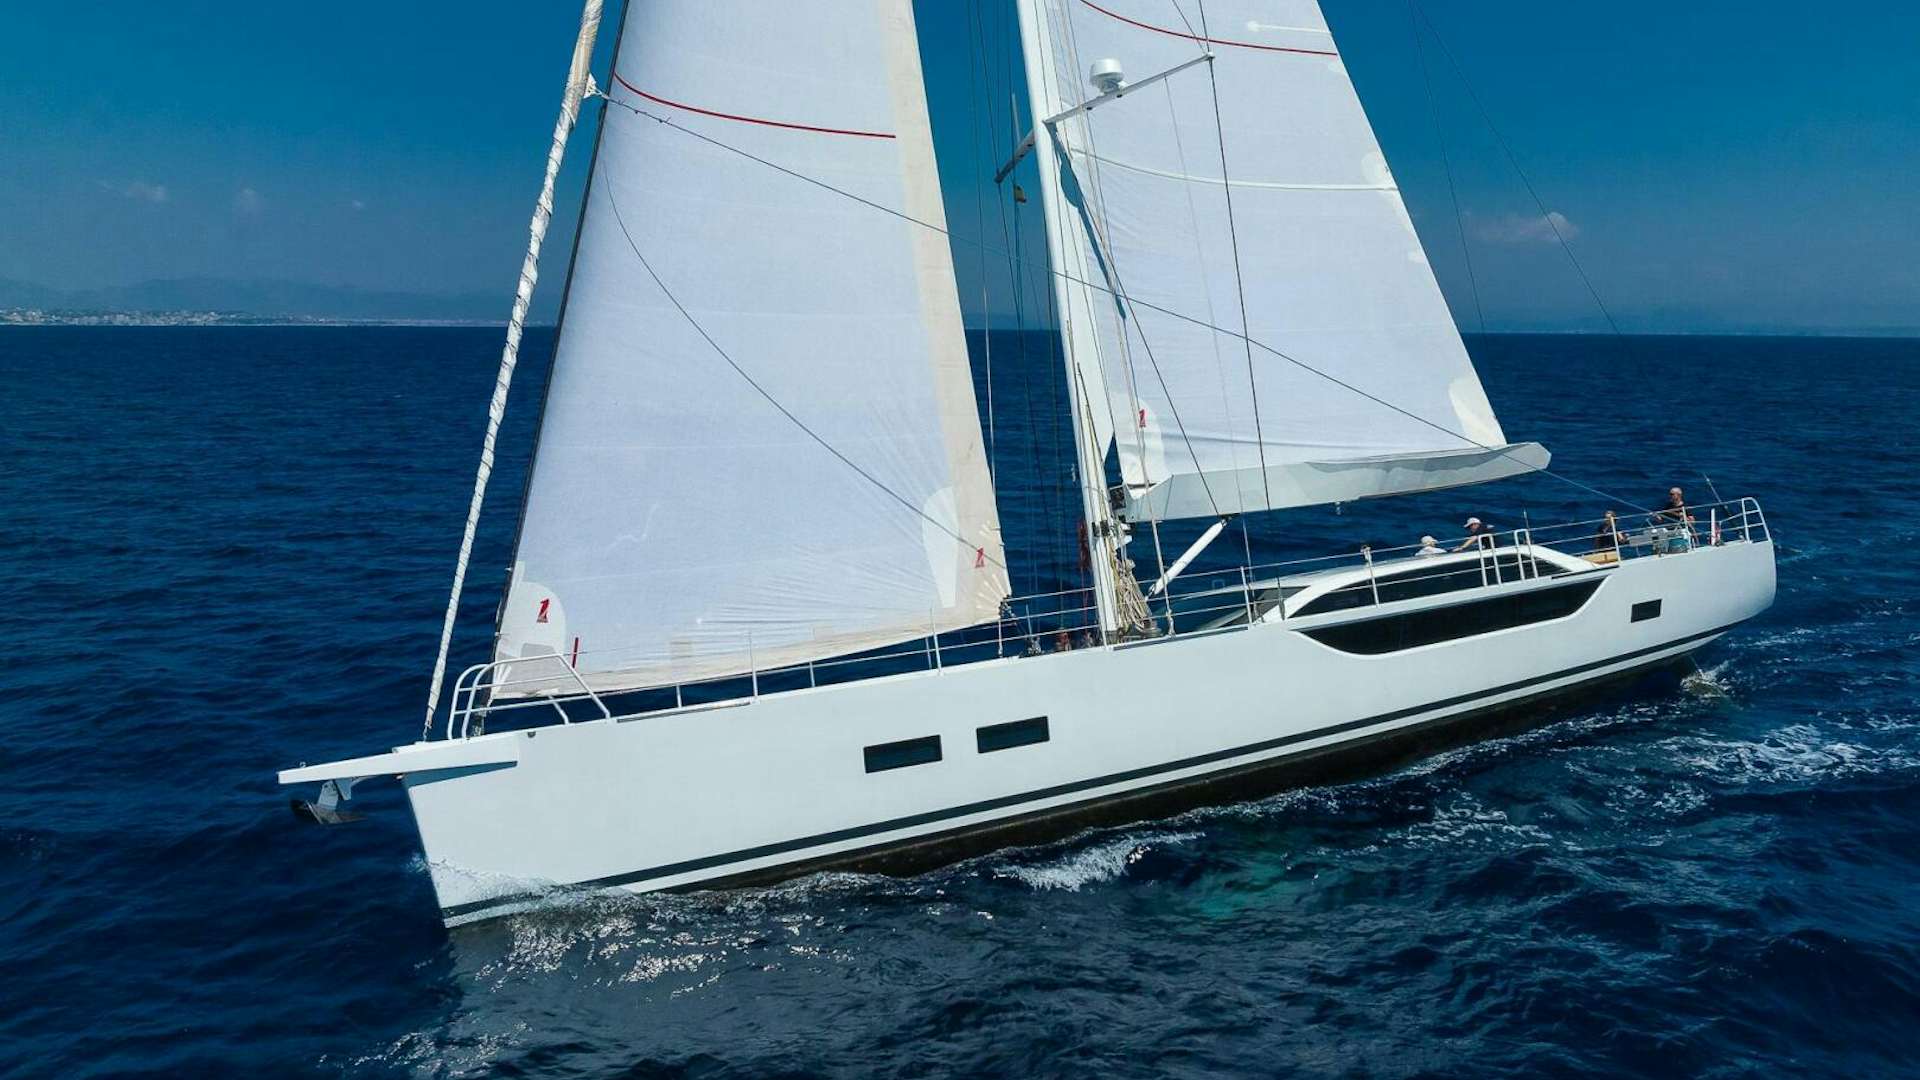 Watch Video for BLISS II Yacht for Sale